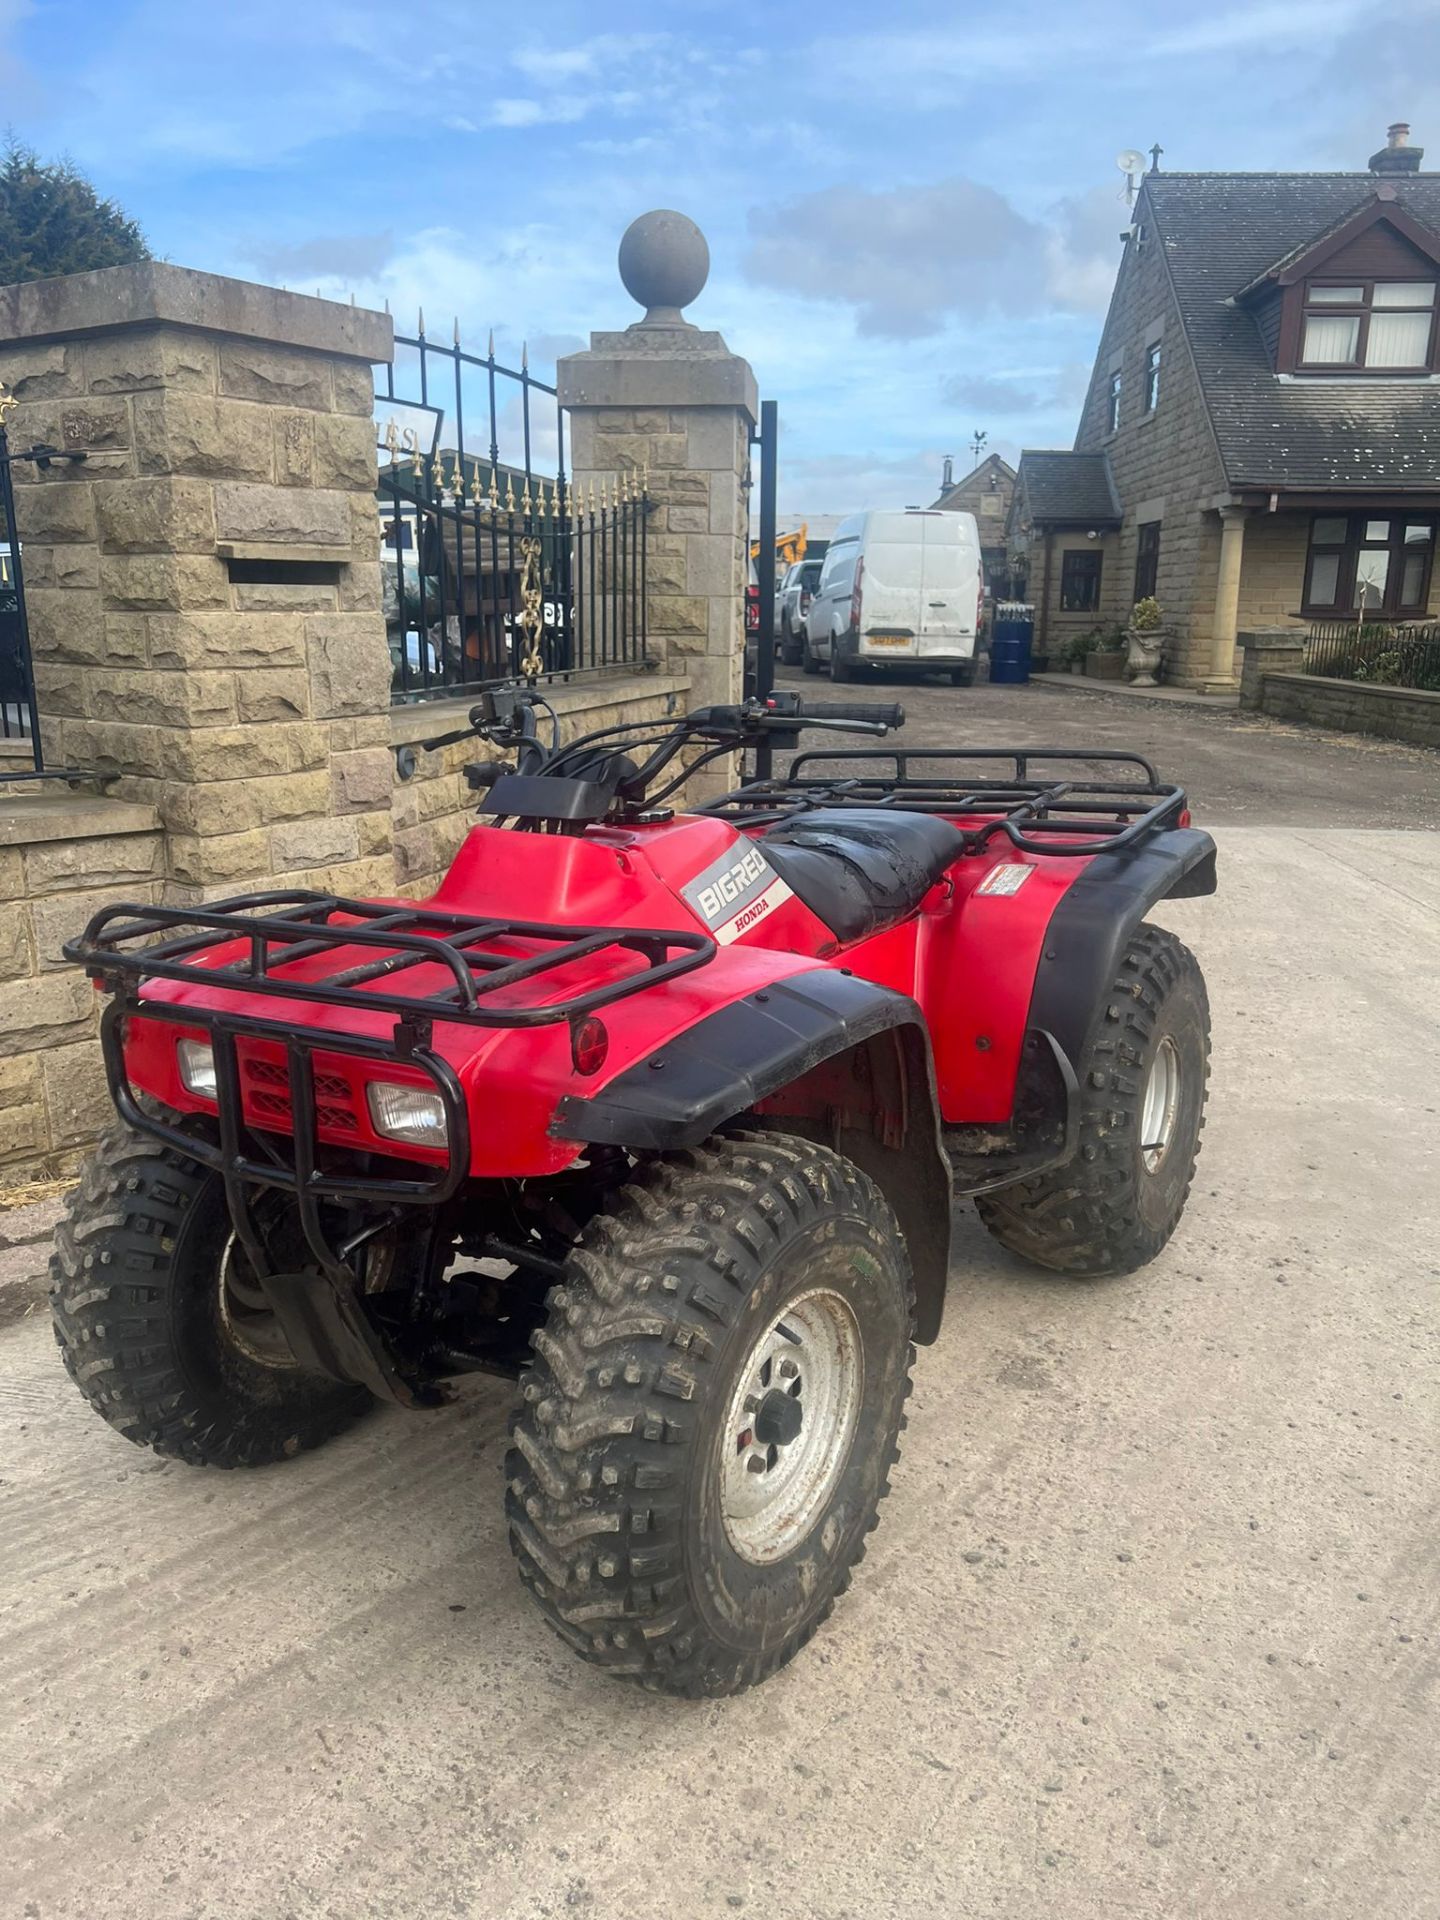 HONDA BIG RED FARM QUAD, TYRES ONLY A FEW MONTHS OLD, RUNS AND DRIVES *PLUS VAT* - Image 2 of 9